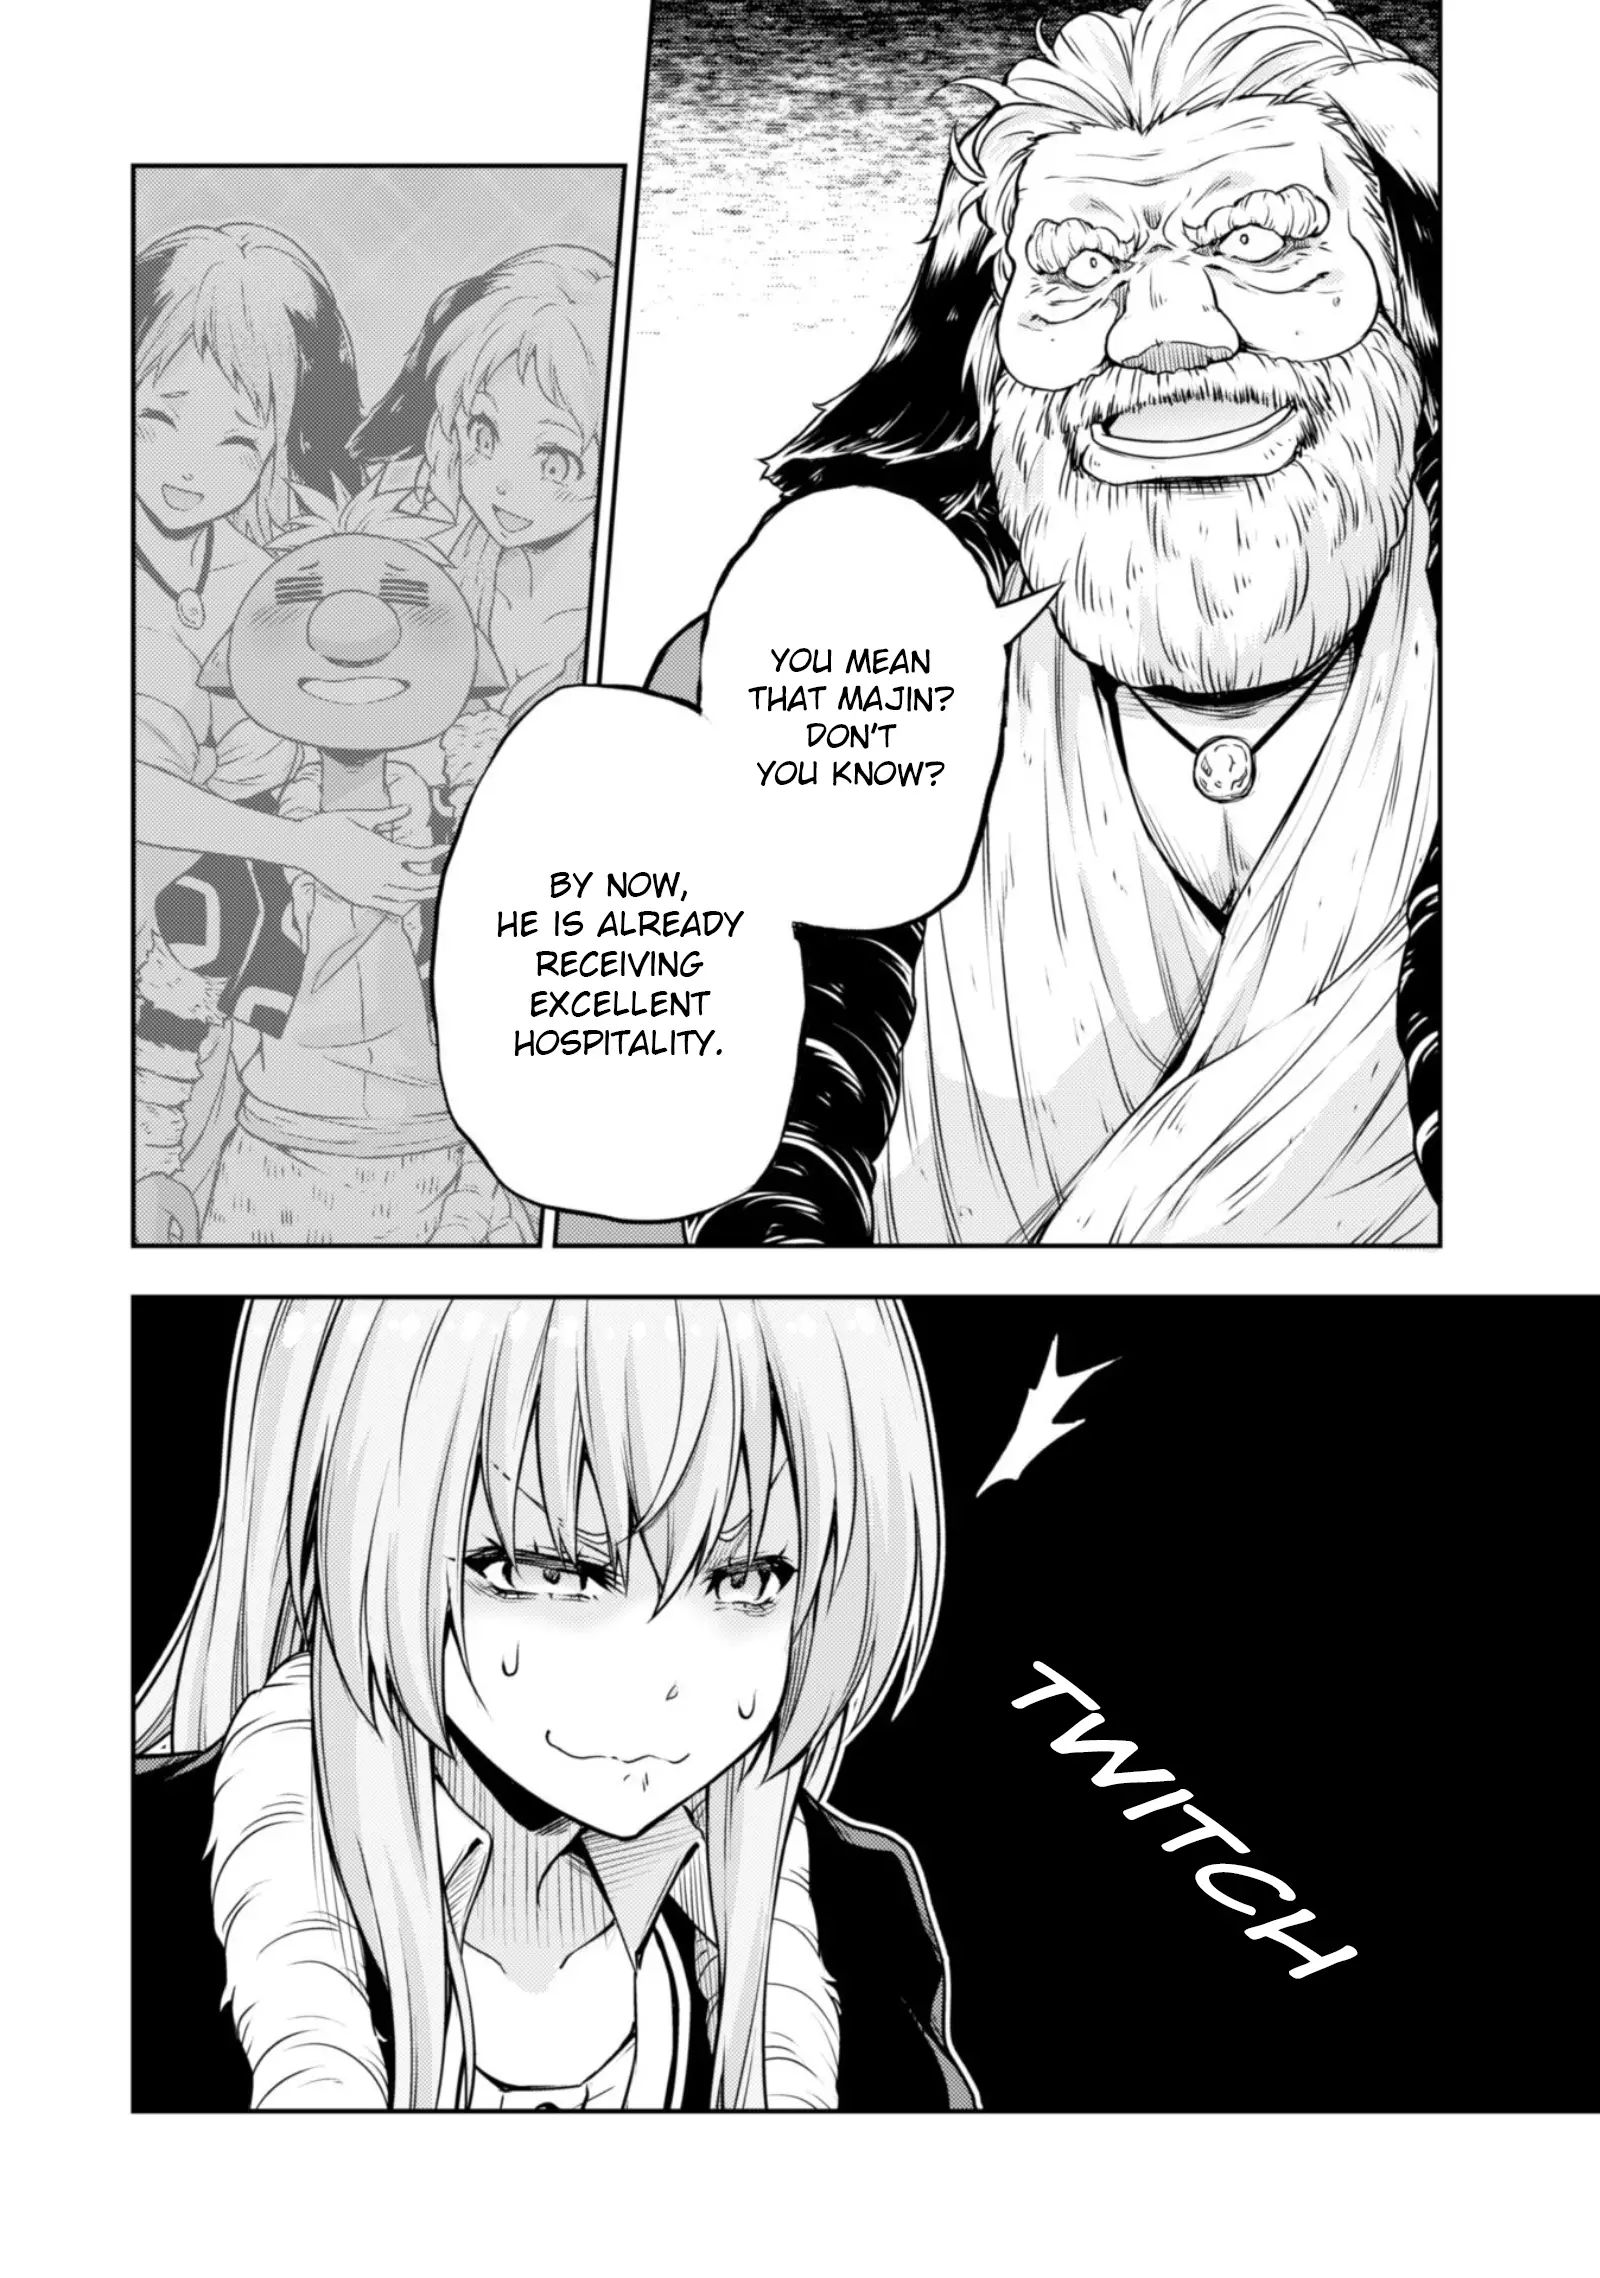 Tensei Shitara Slime Datta Ken: The Ways of Strolling in the Demon Country - 40 page 9